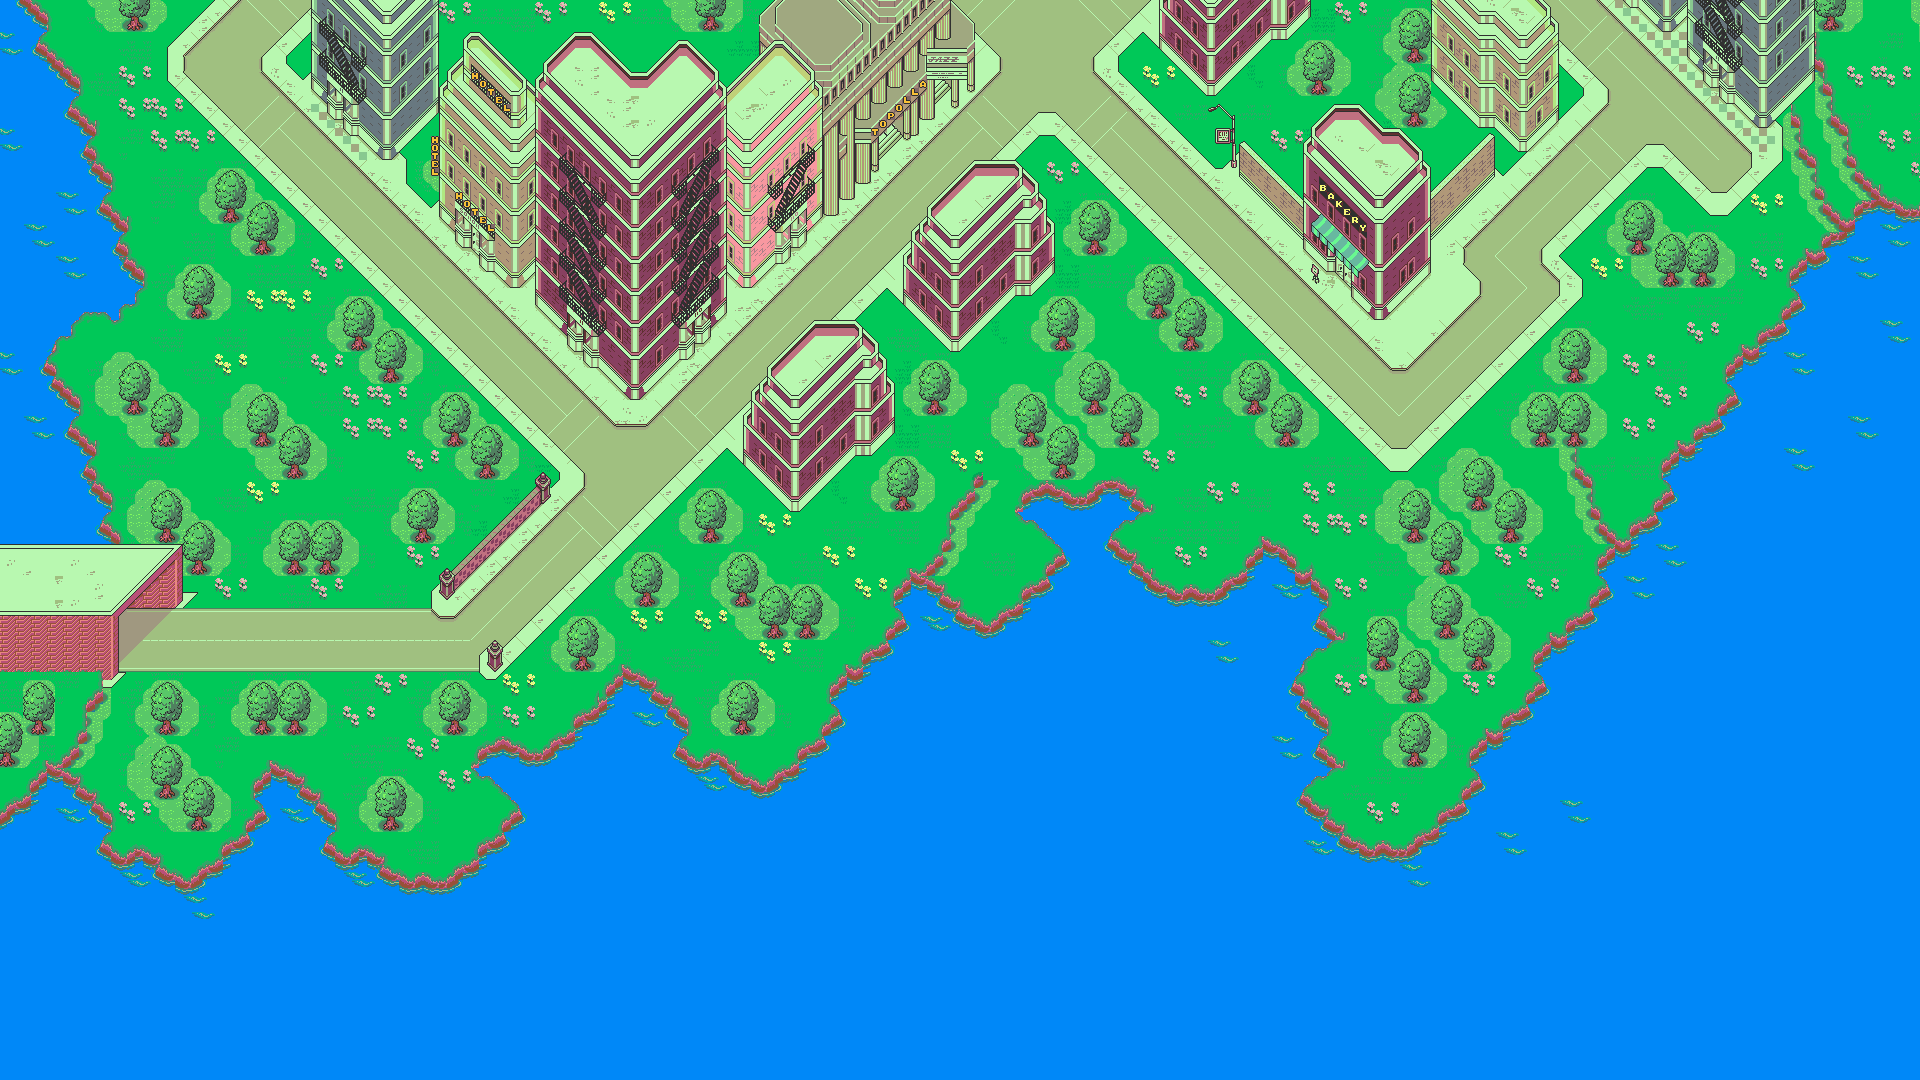 Video Game EarthBound 1920x1080